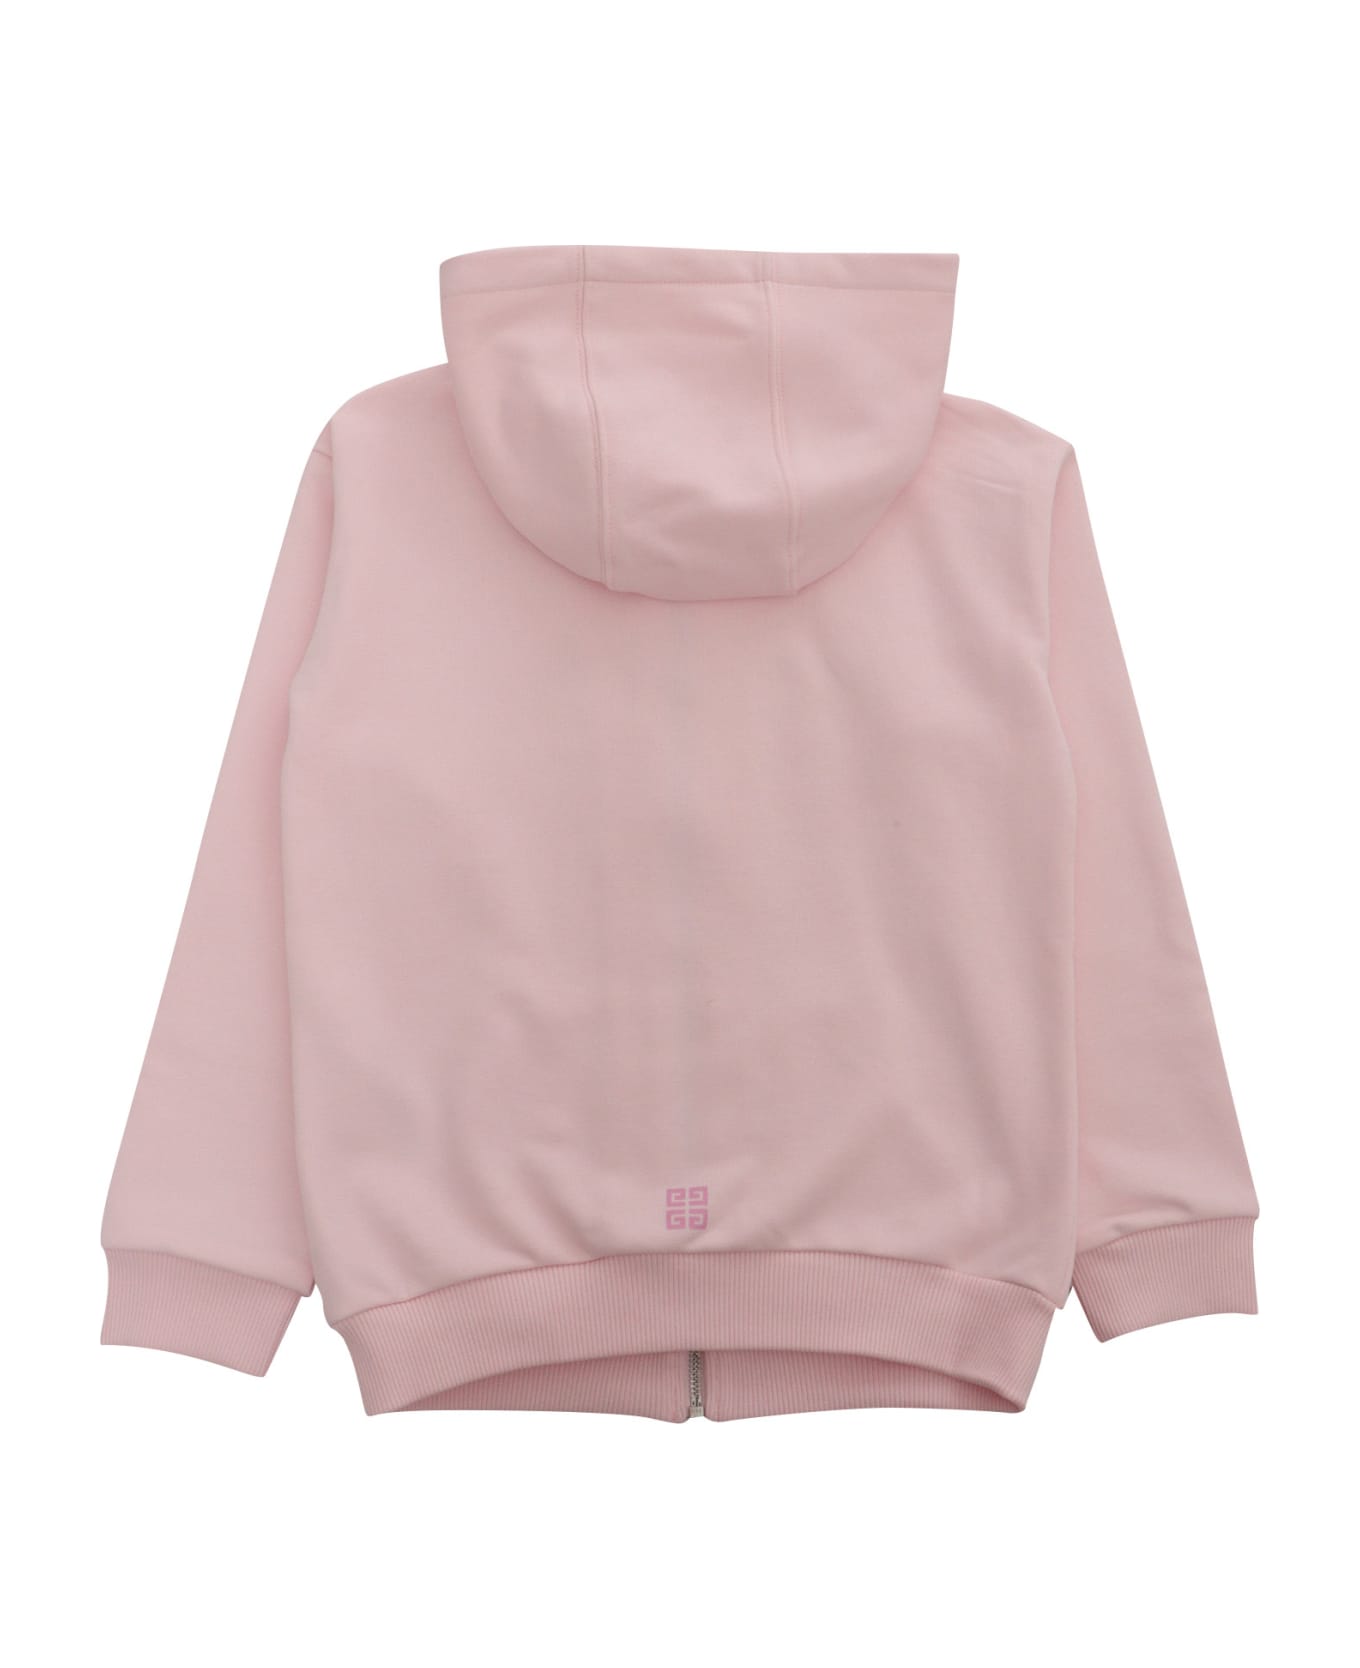 Givenchy Pink Hooded With Logo - PINK